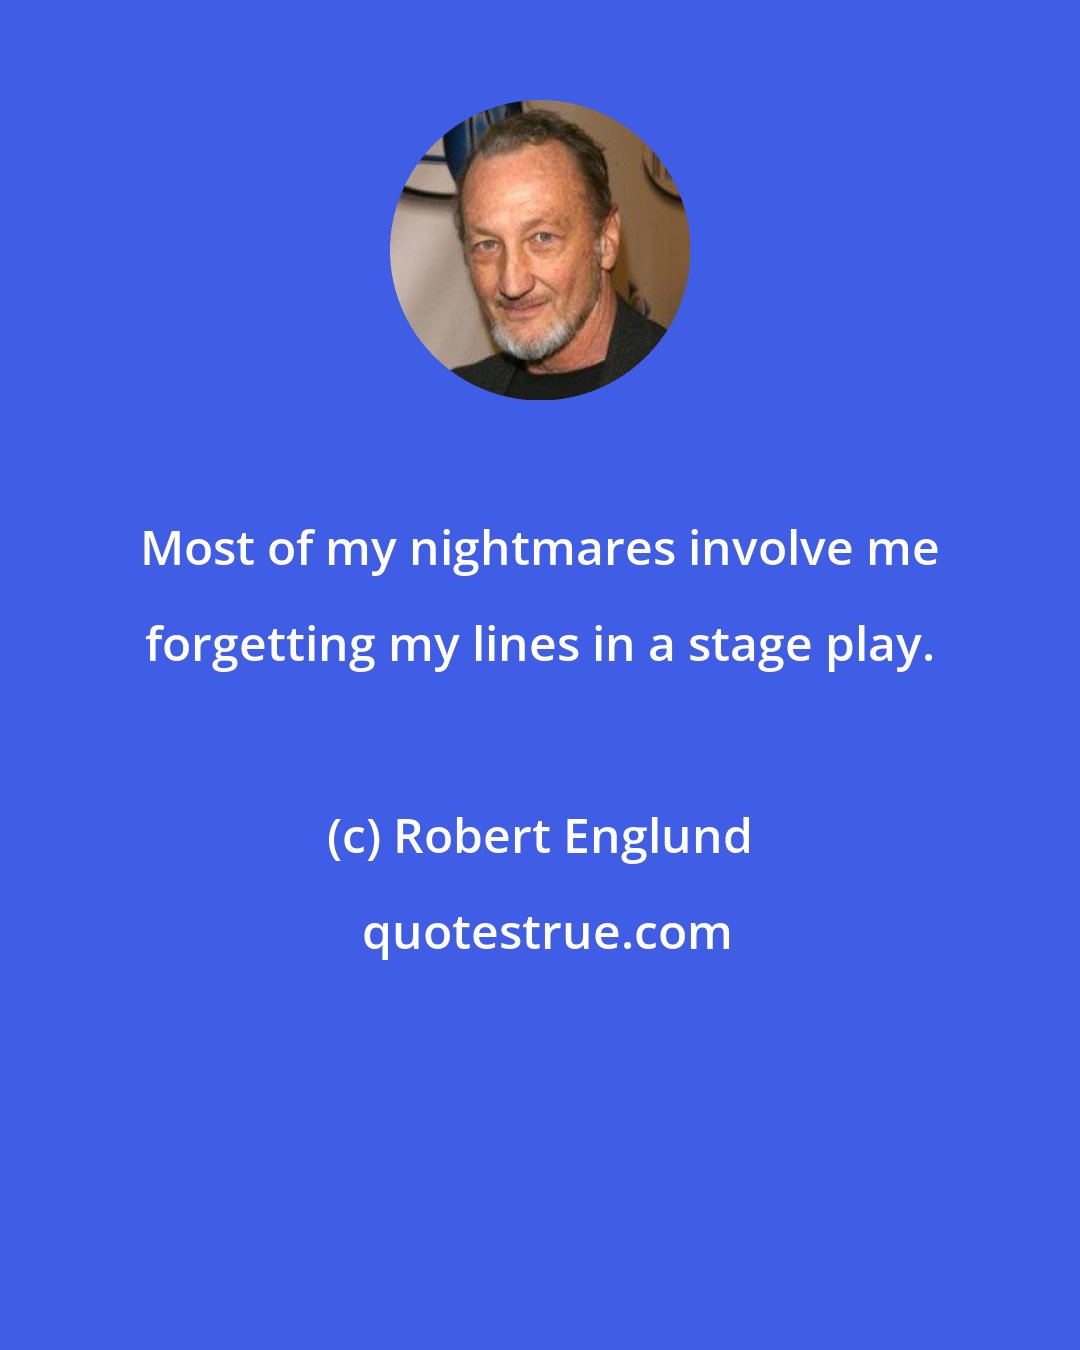 Robert Englund: Most of my nightmares involve me forgetting my lines in a stage play.